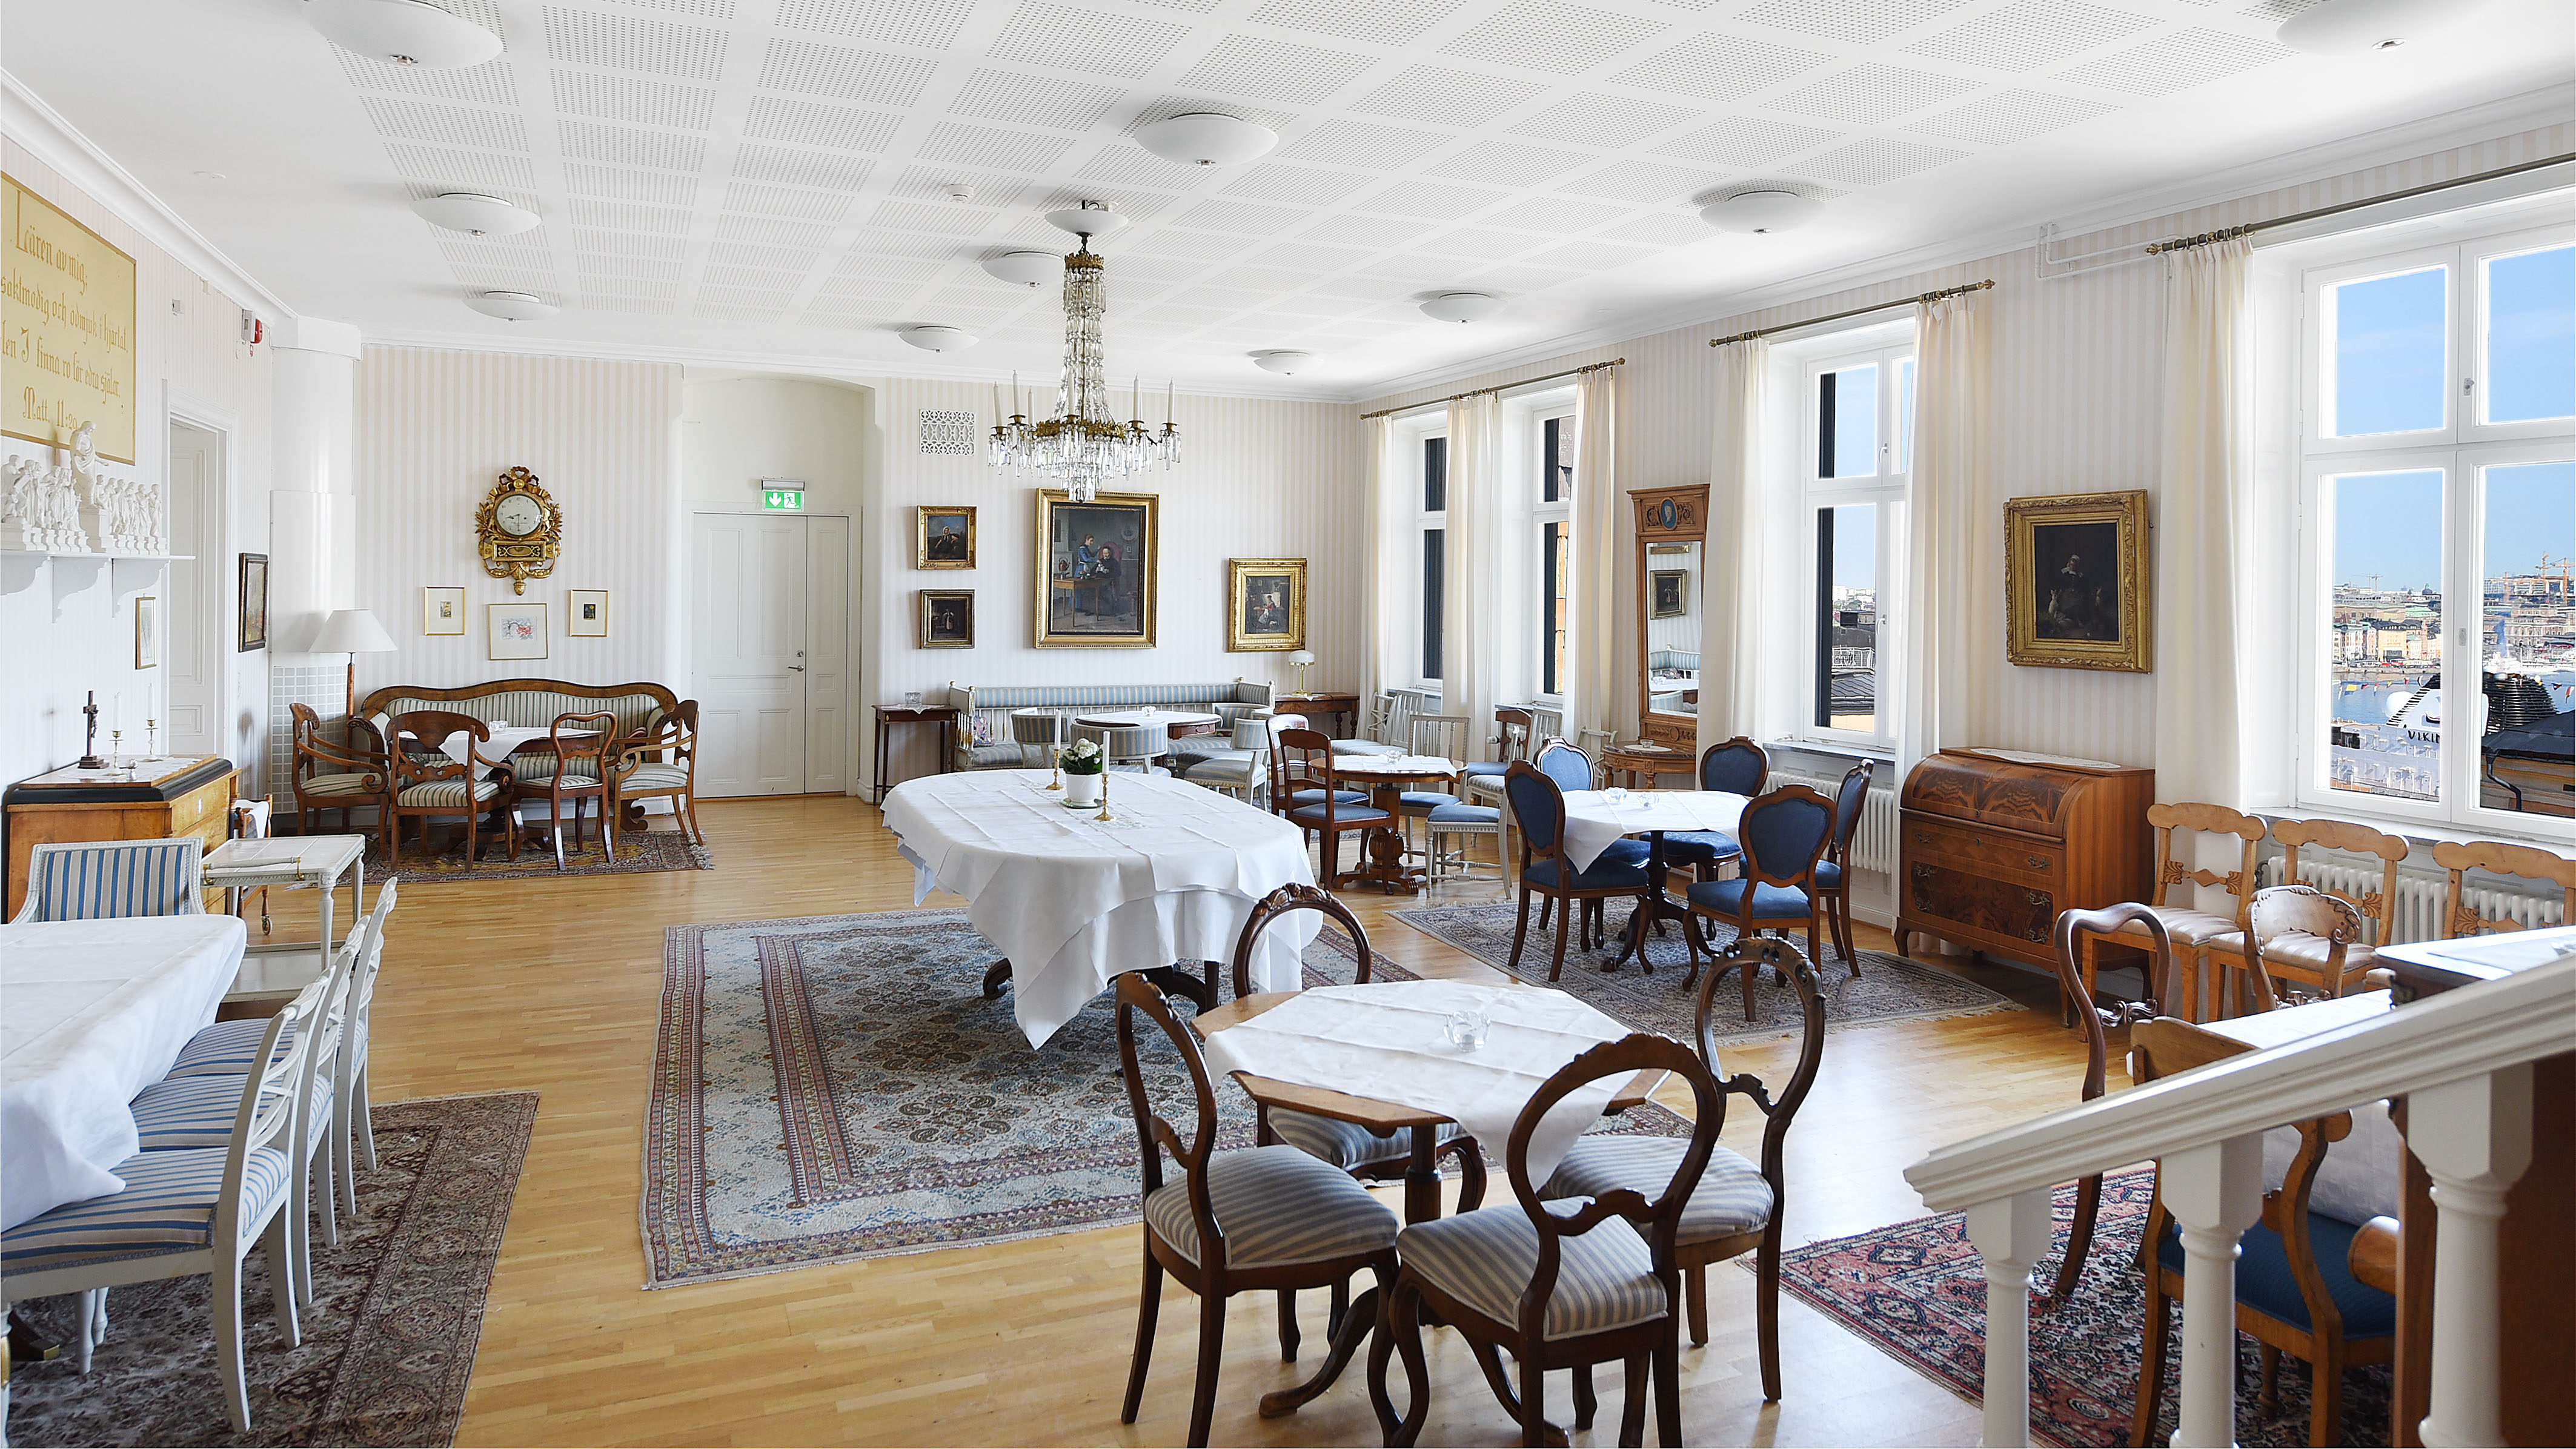 Systersalongen can accommodate 50 people in café seating